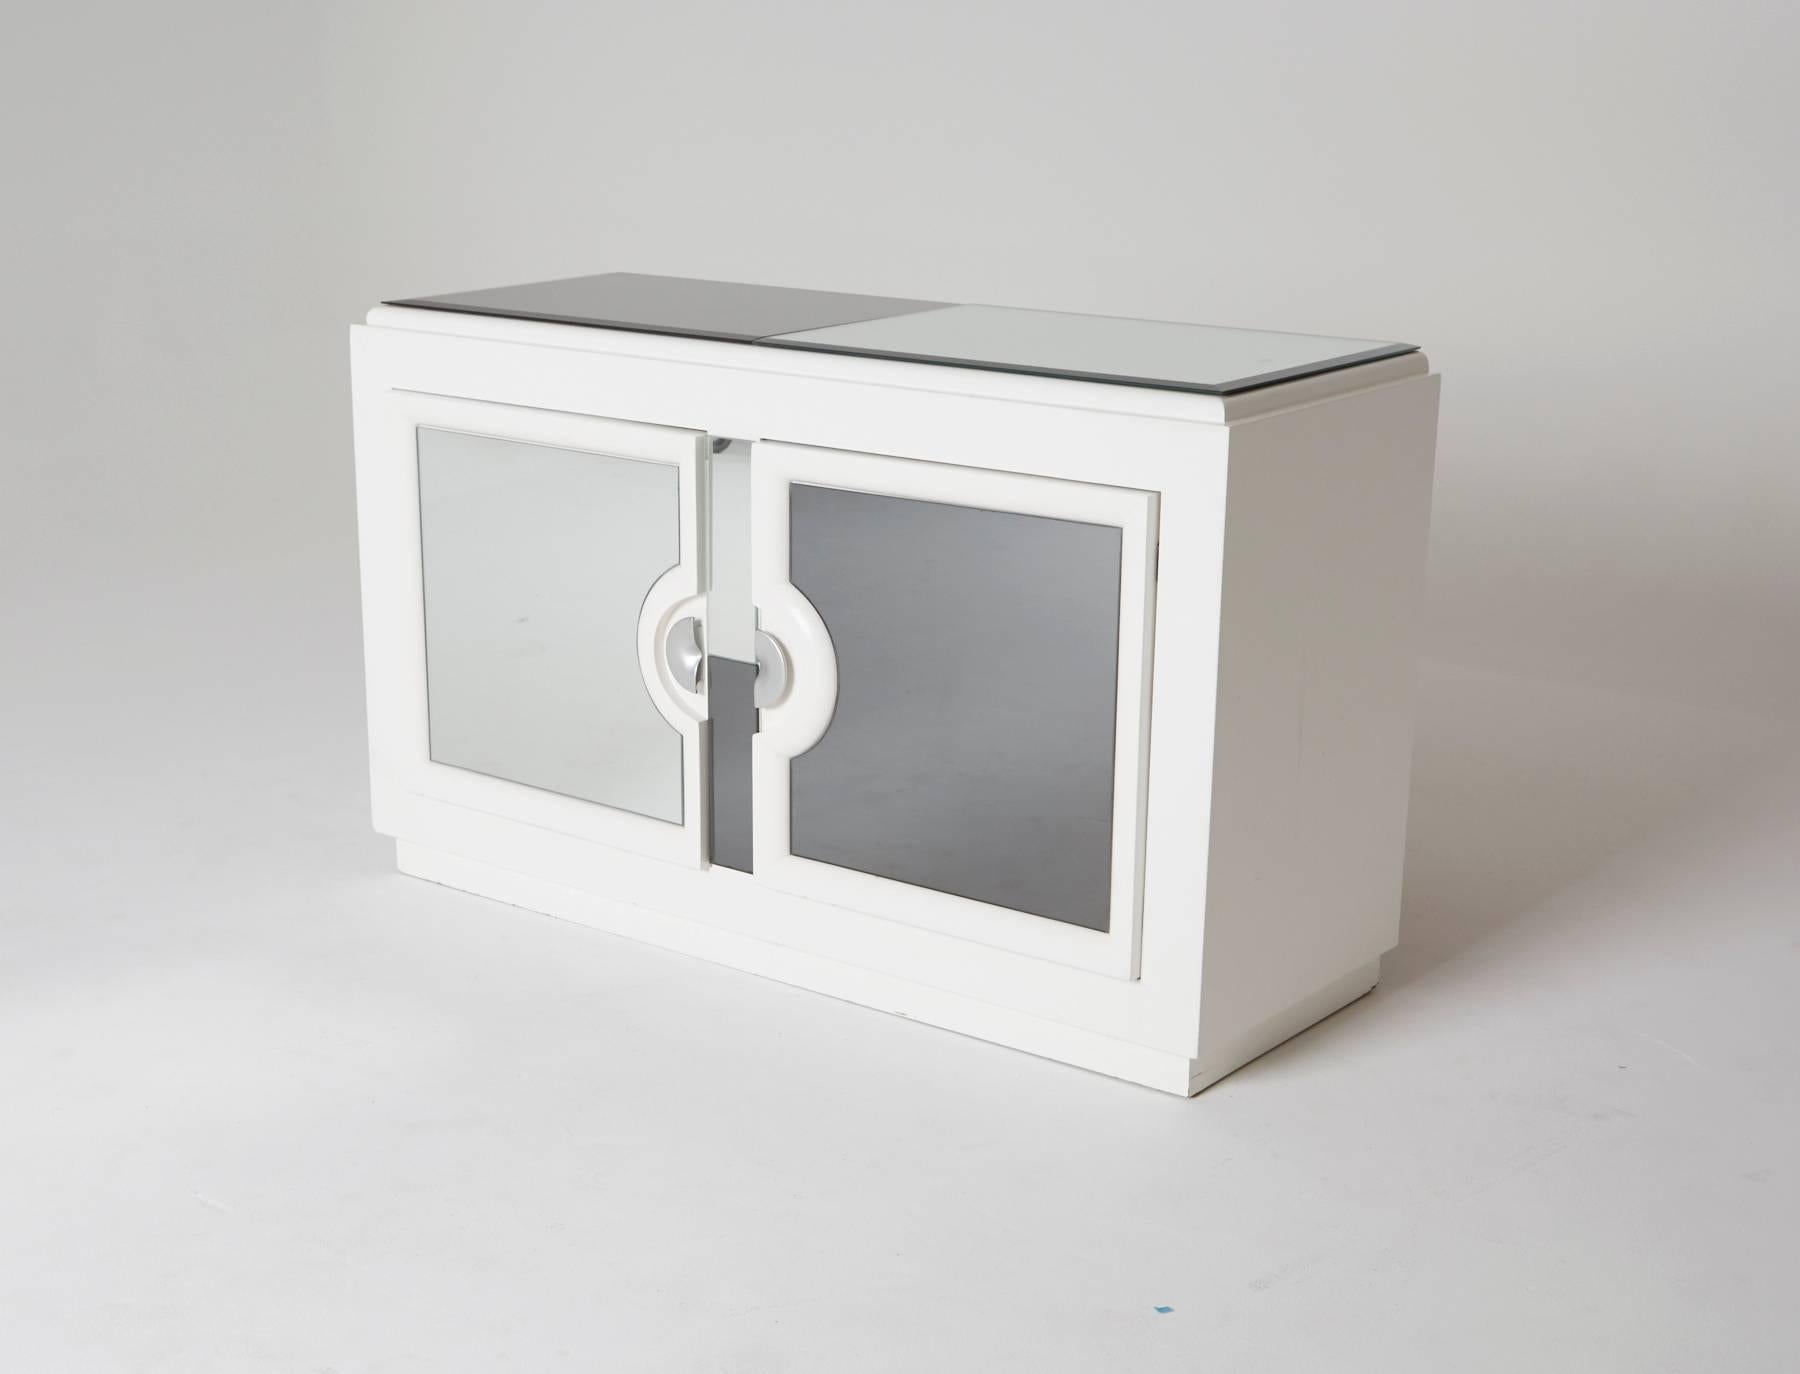 This Paul Laszlo styled credenza has a clean white lacquered frame and glass surfaces, alternating between mirrored and smoked, on the front face and the top. The cabinet doors, with adjoining half-circle handles, open two storage compartments; One